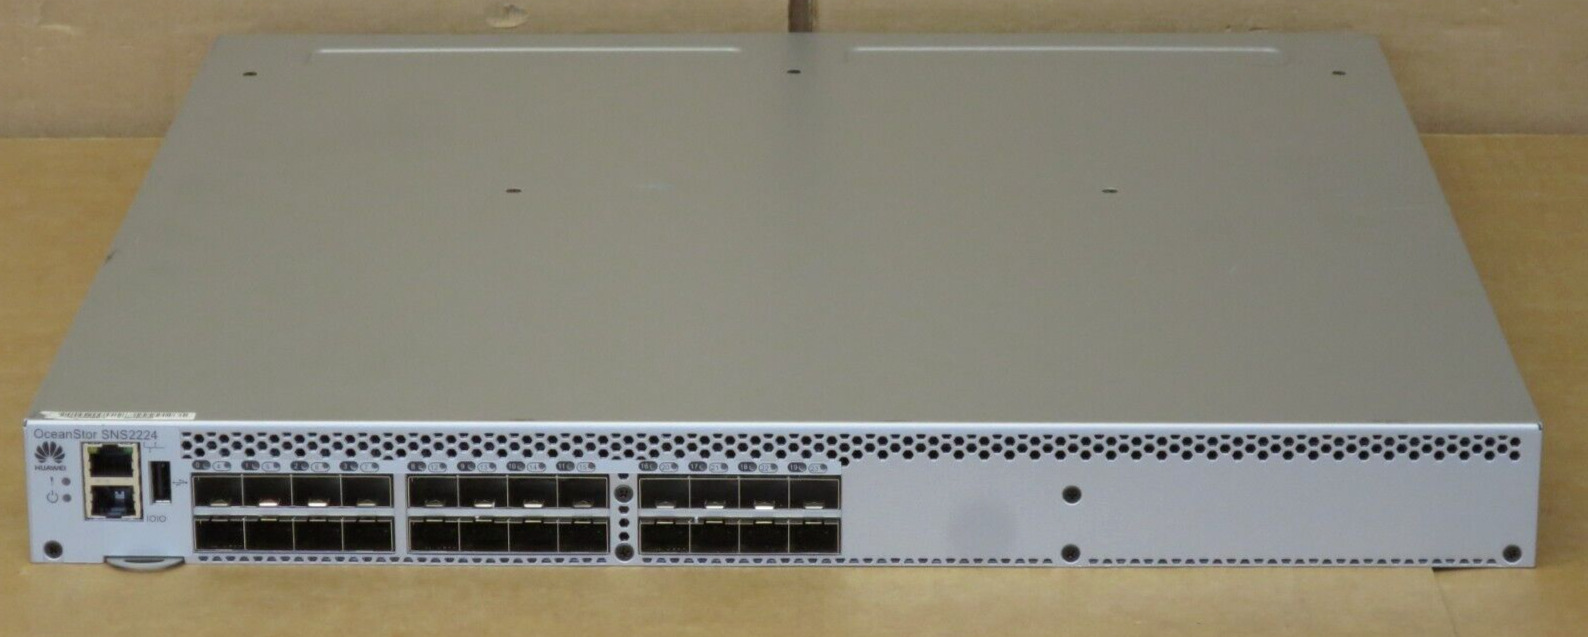 Huawei SNS2224 16Gb/s 24-Port (24-Active) SFP+ FC SAN Switch BR-6505-12-16G-0R